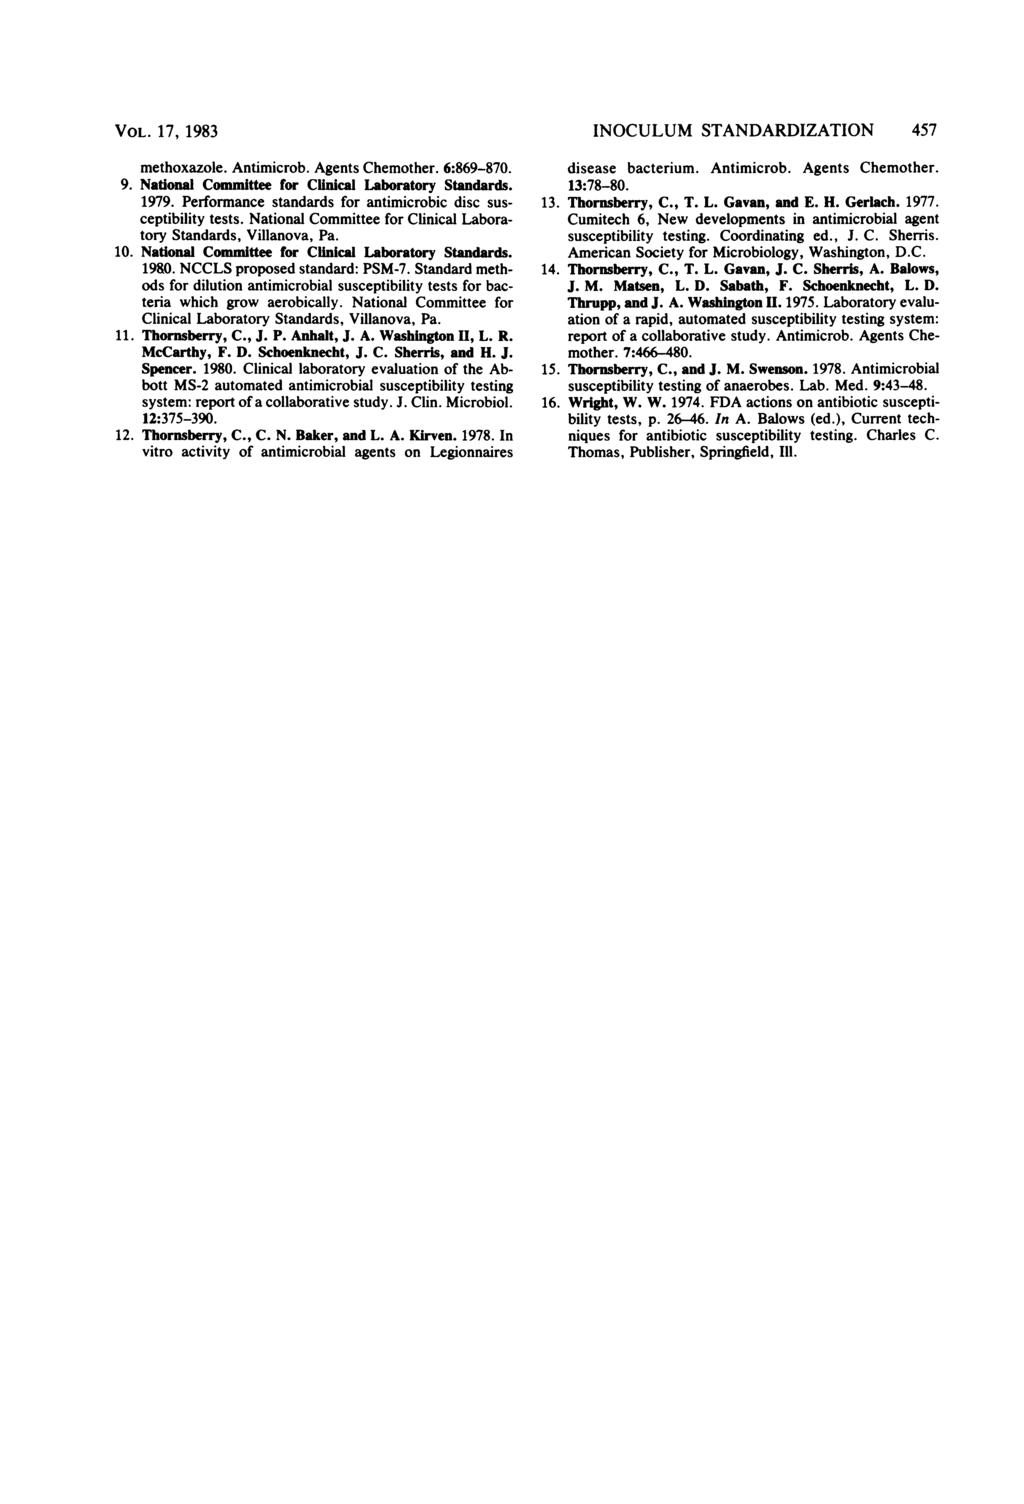 VOL. 17, 1983 methoazole. Antimicrob. Agents Chemother. 6:869-87. 9. National Committee for Clinical Laboratory Standards. 1979. Performance standards for antimicrobic disc susceptibility tests.